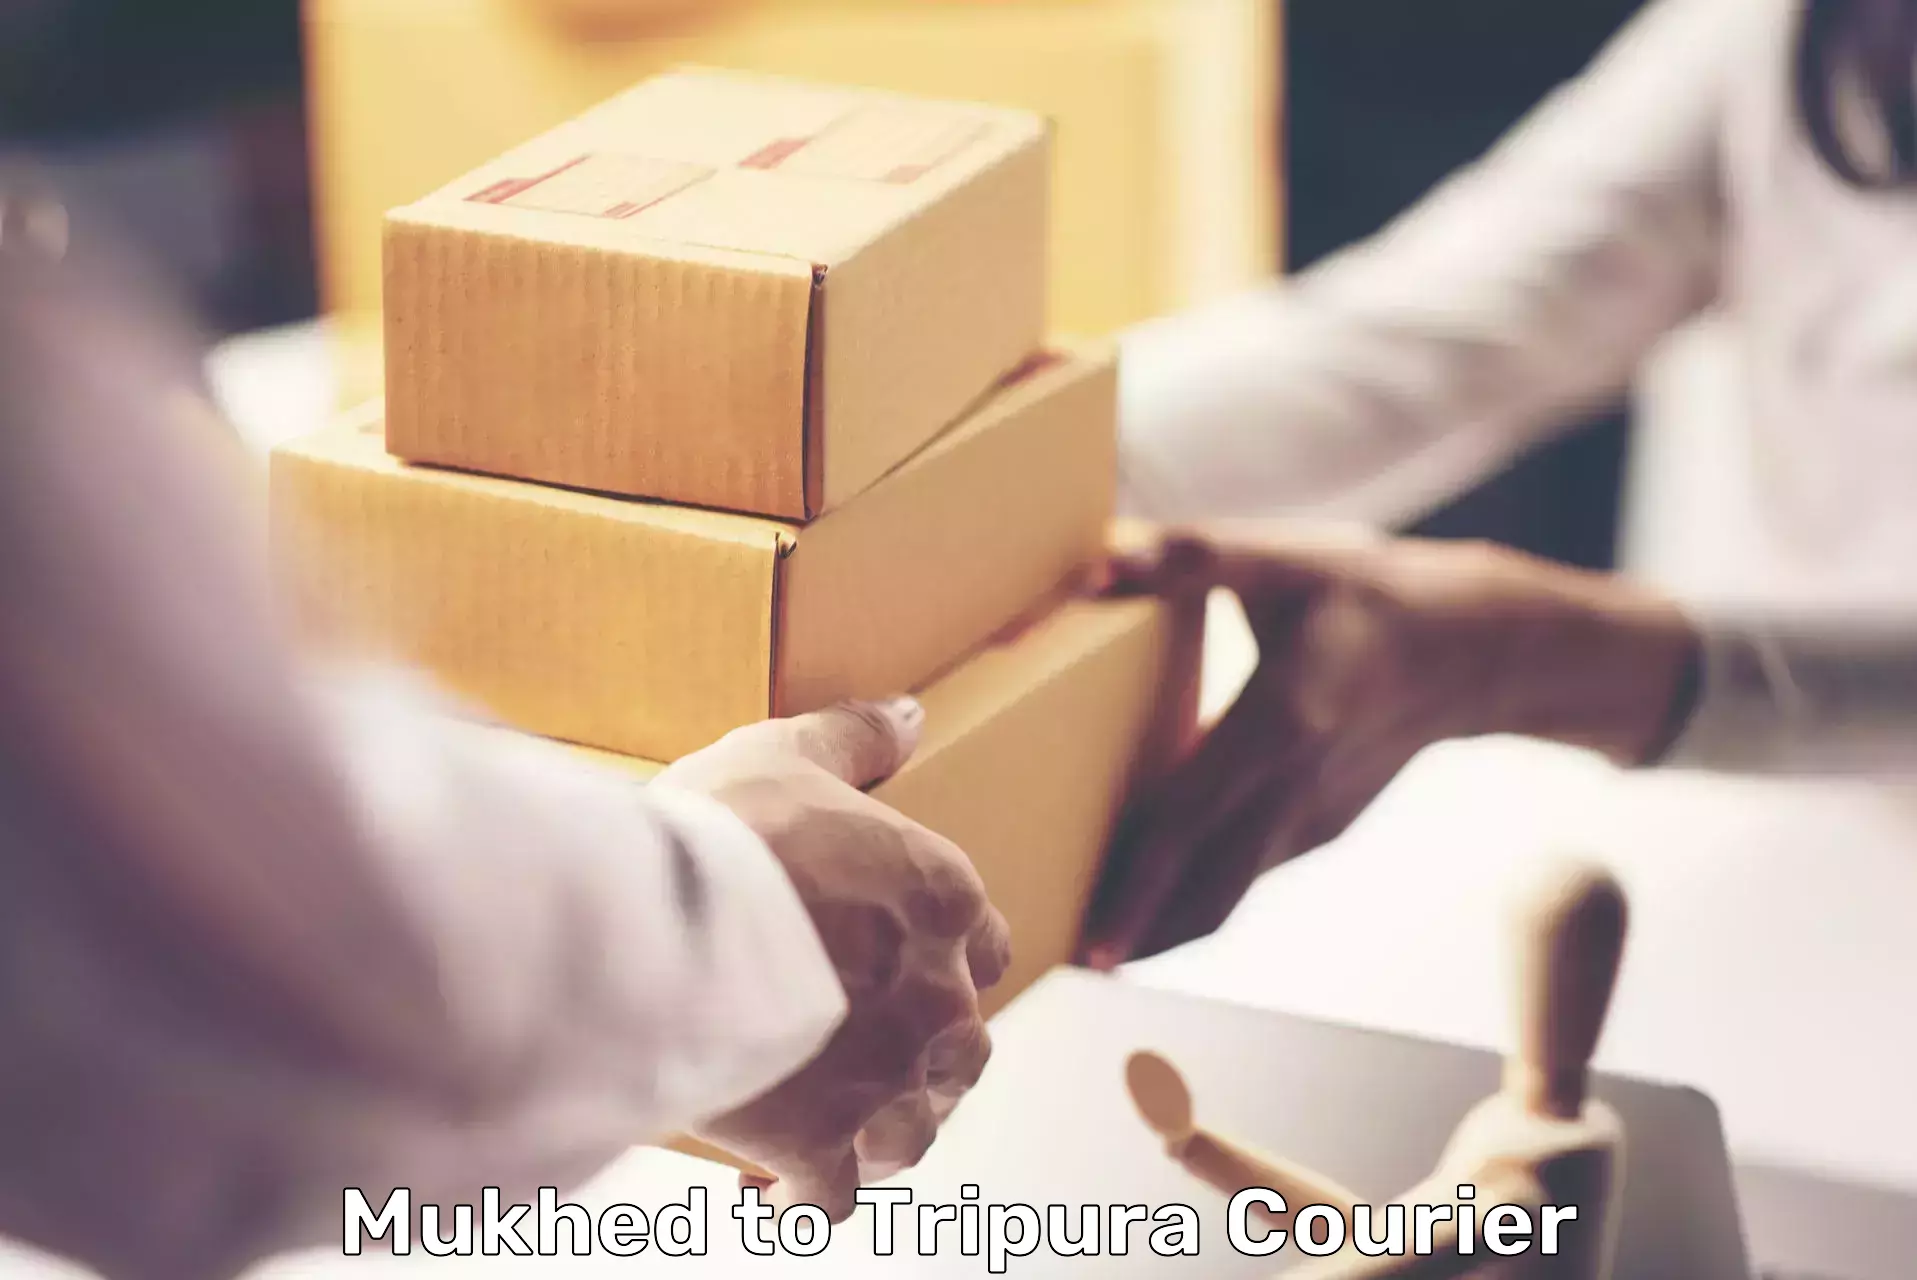 Courier service efficiency Mukhed to Udaipur Tripura